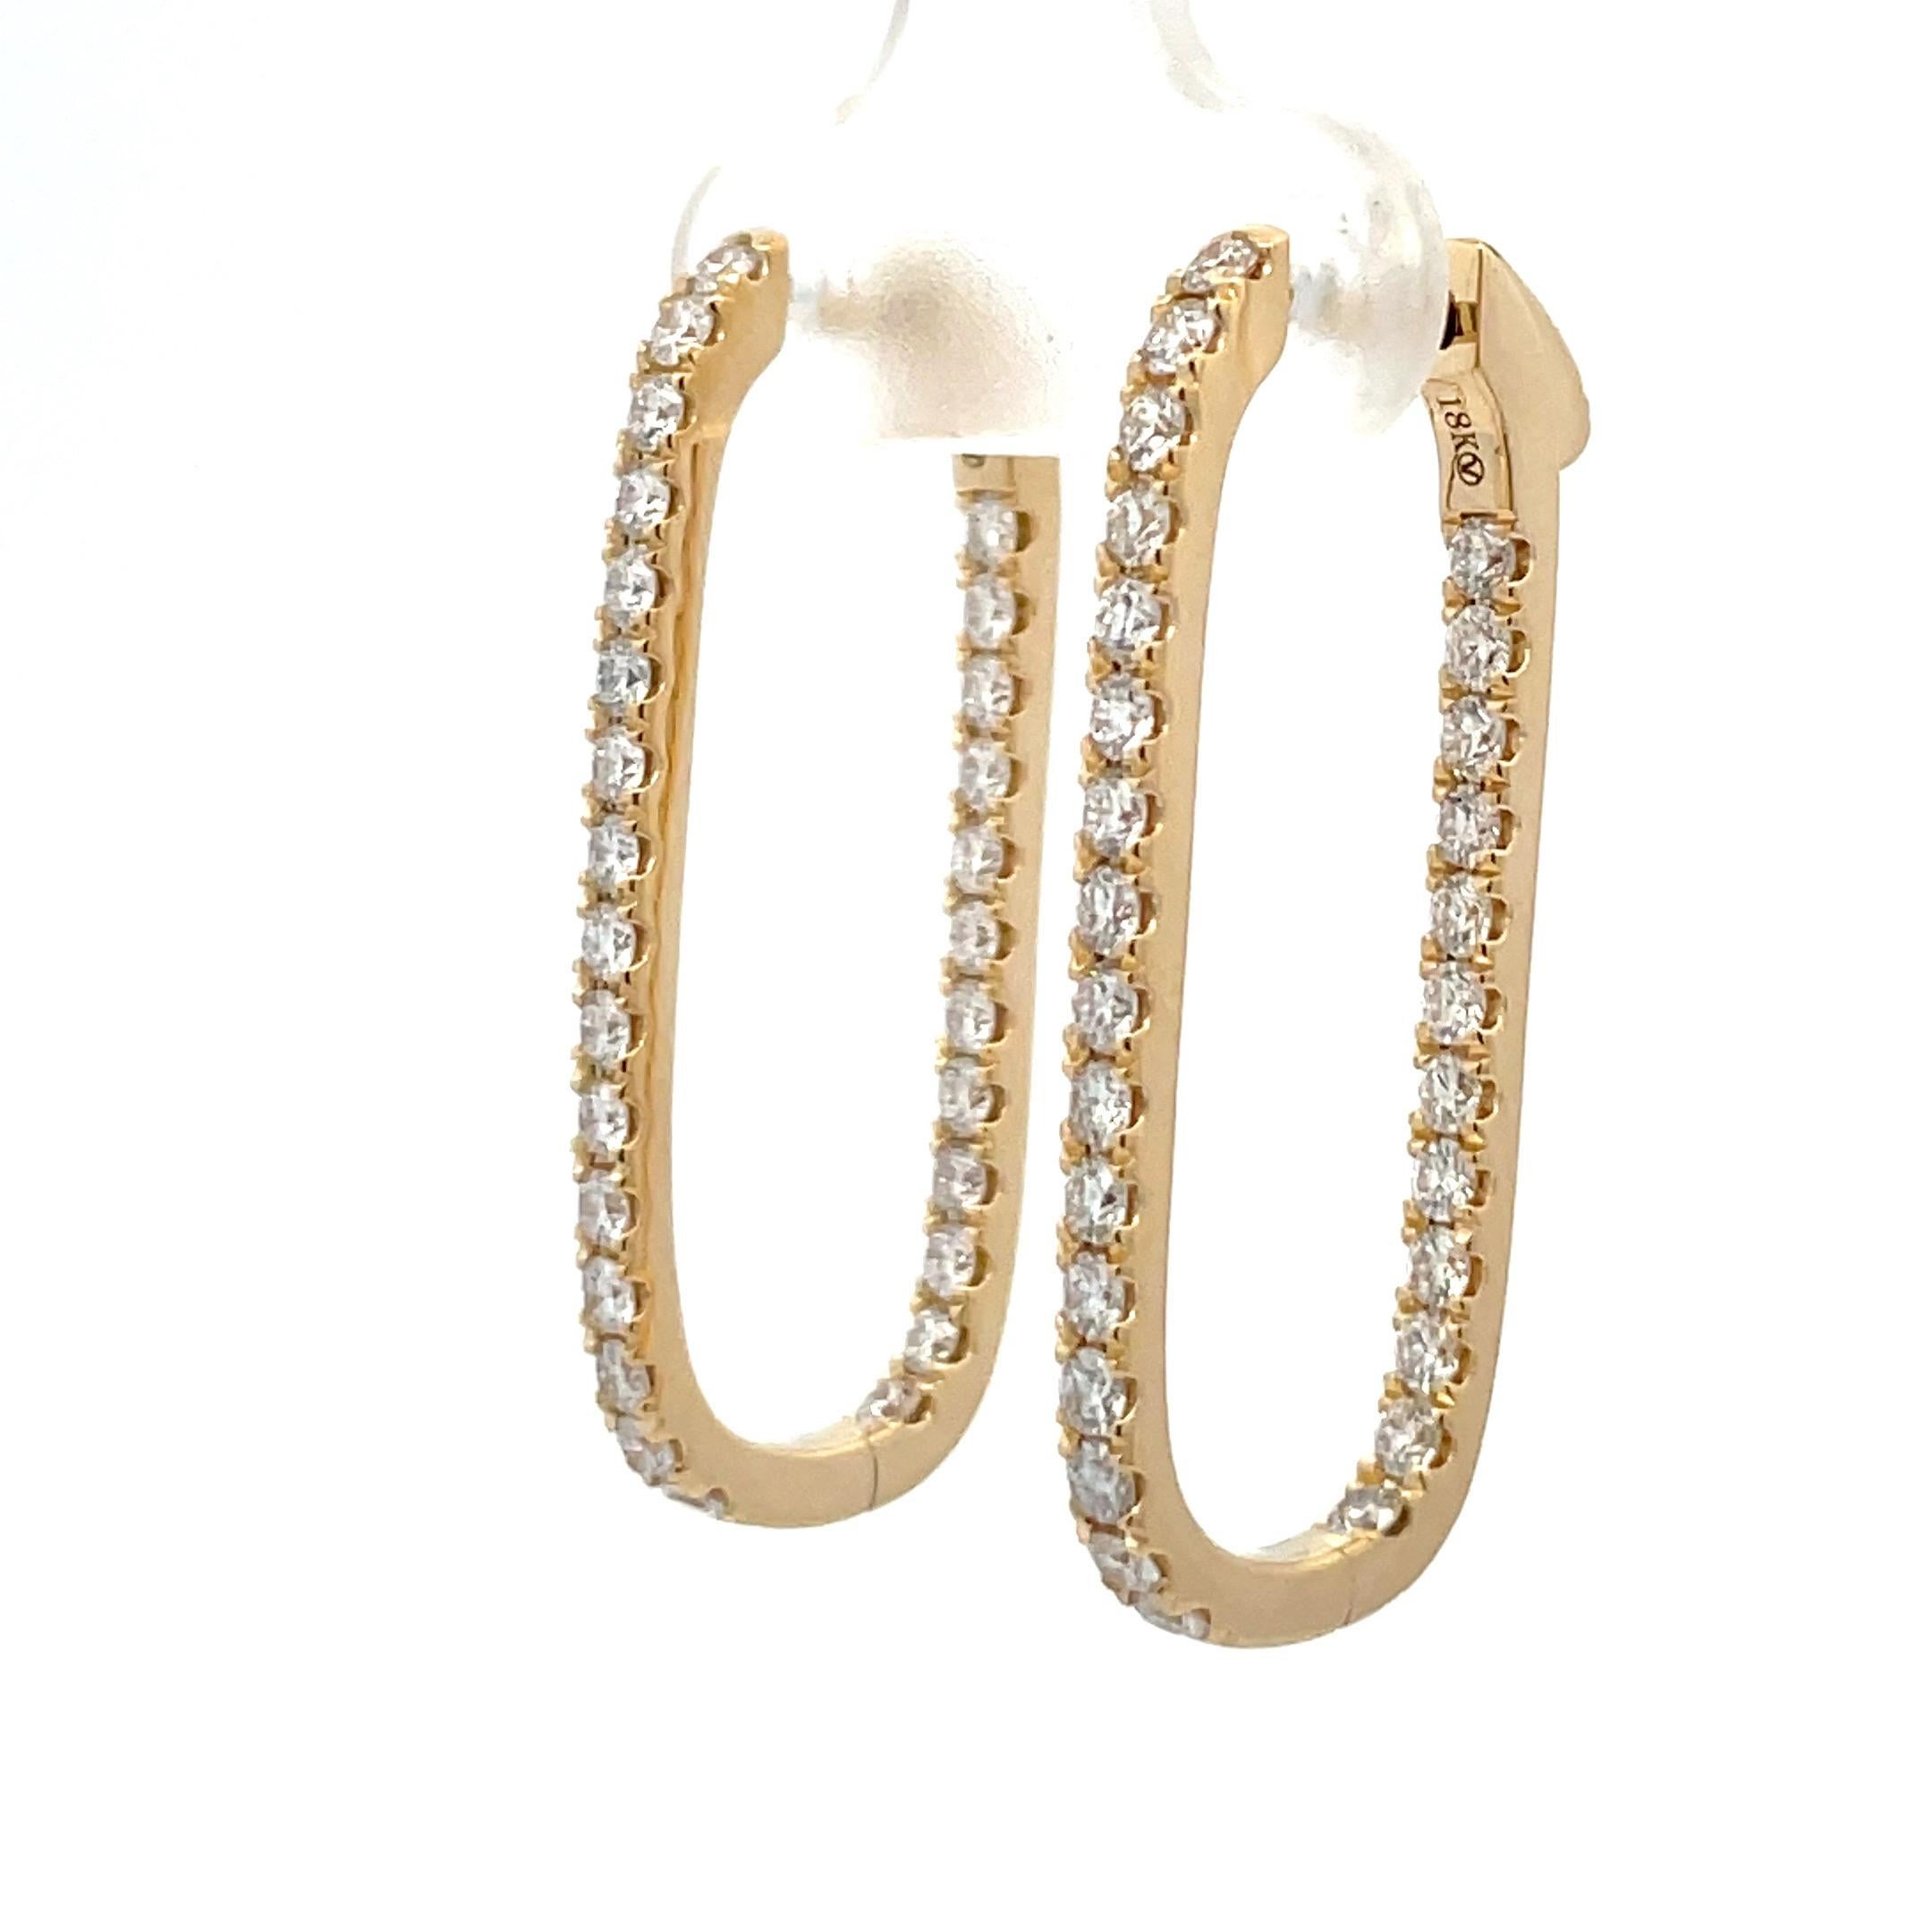 18 Karat yellow gold paper clip earring featuring 56 round brilliance weighing 1.52 carats, 5.7 Grams.
Color G
Clarity SI